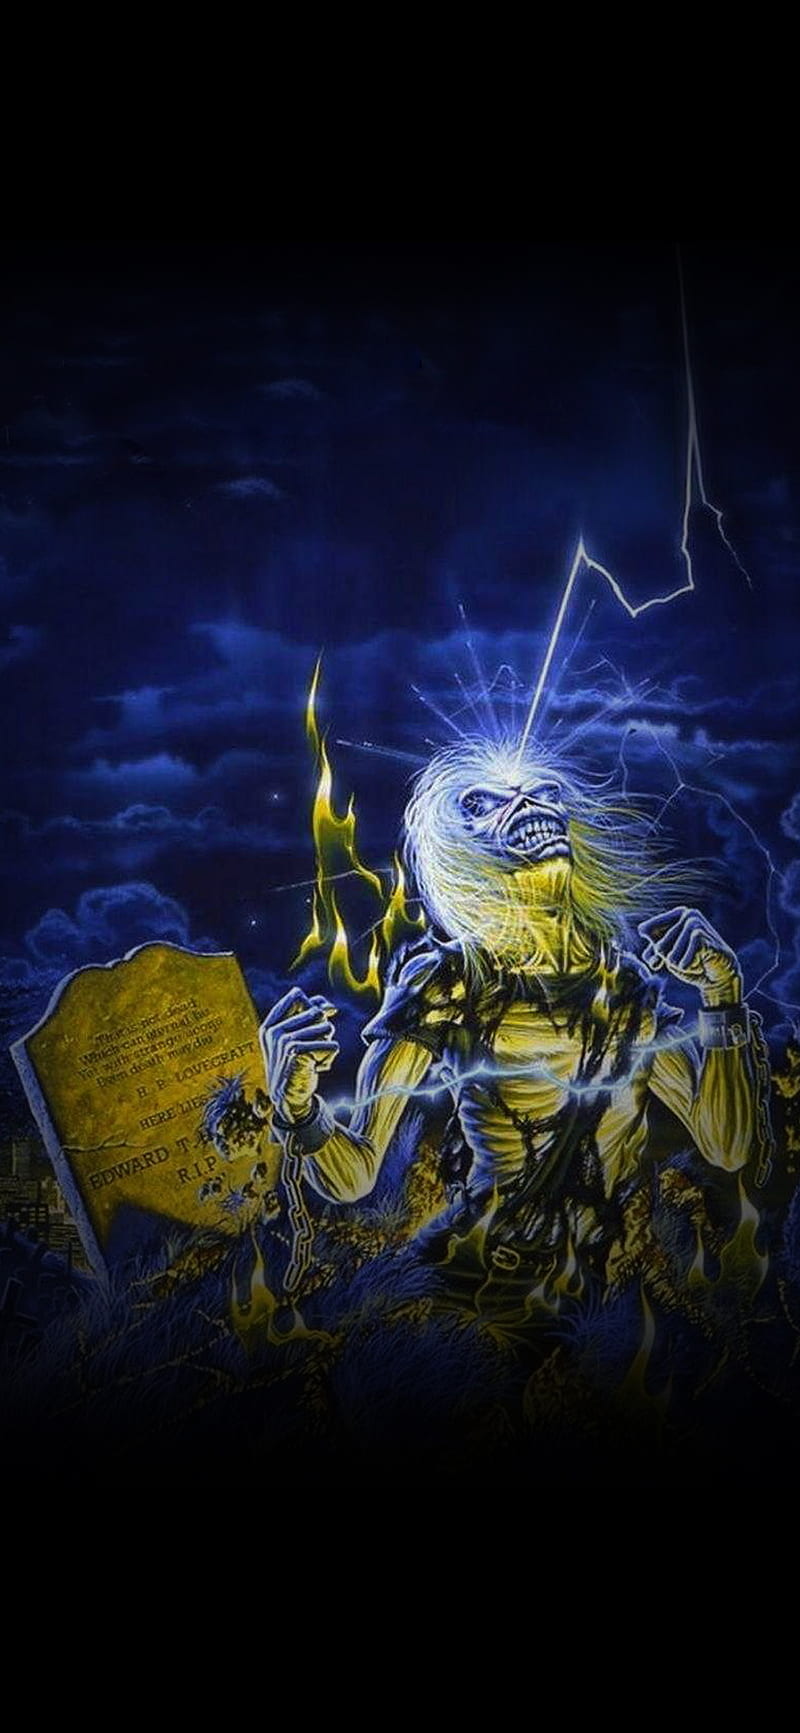 Live after Death, cd cover, eddie, iron maiden, mobile background, HD phone wallpaper